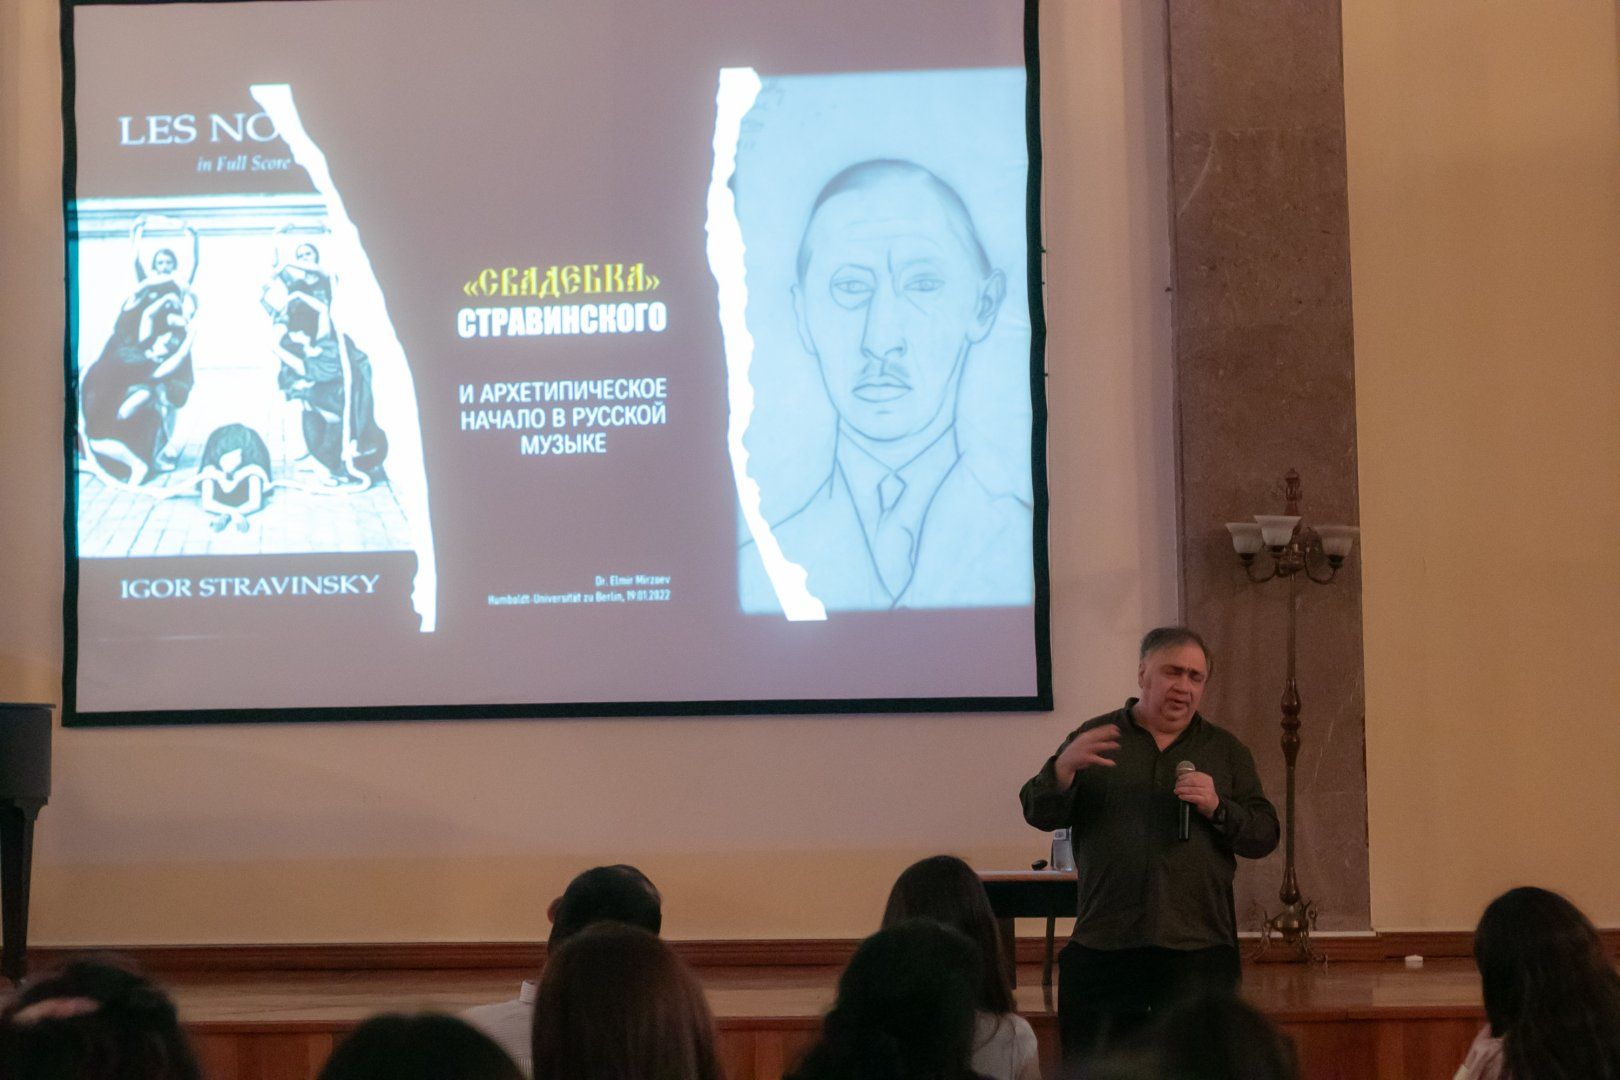 Baku Museum Center hosts lecture by well-known culturologist [PHOTOS]